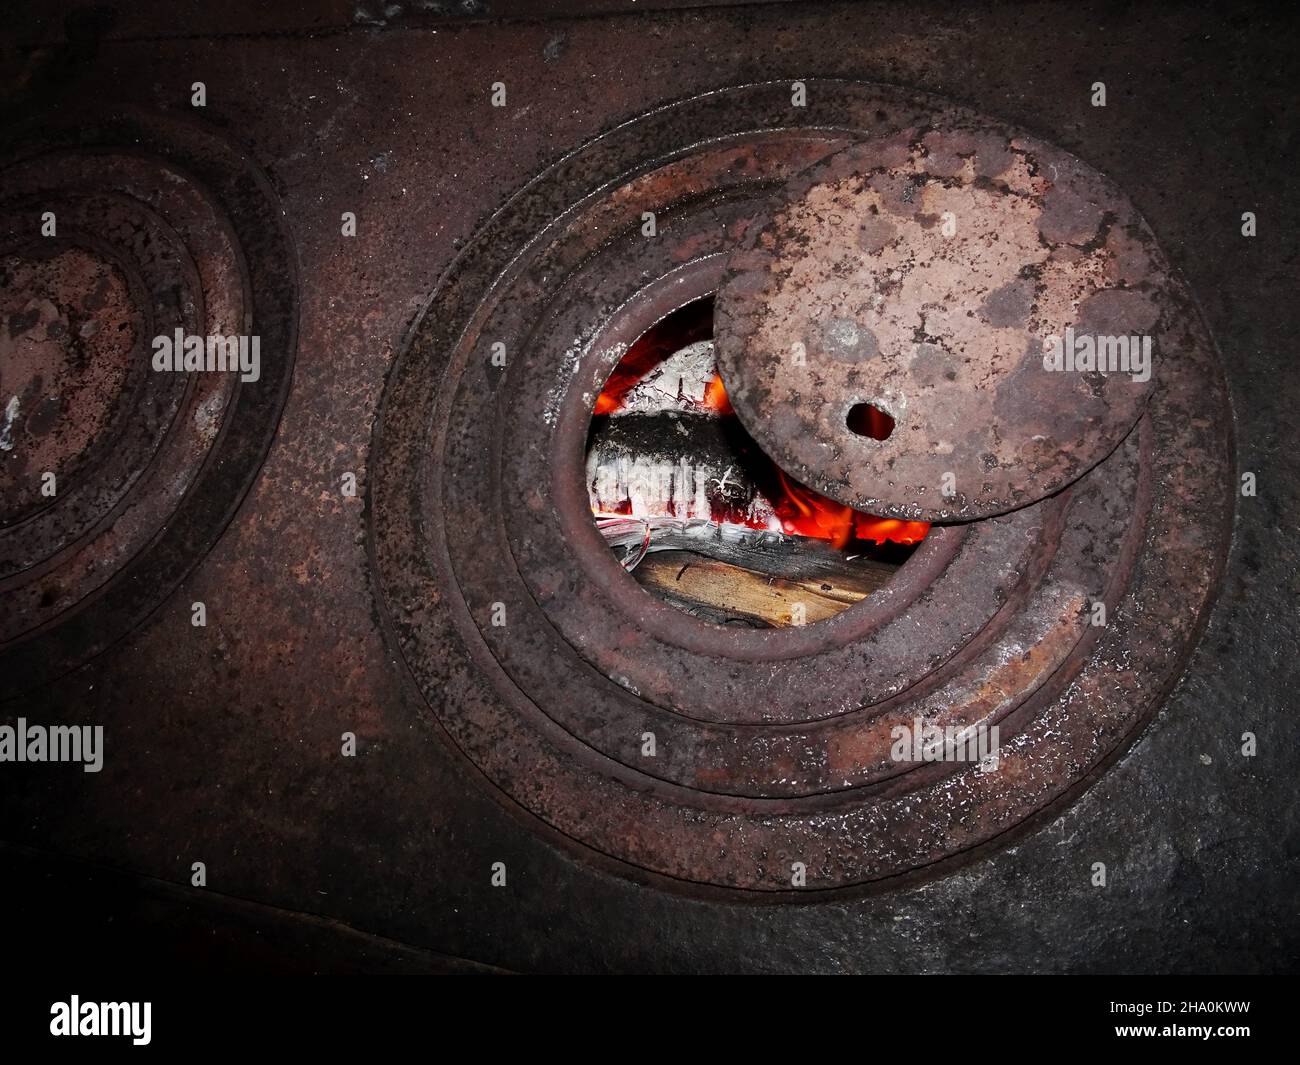 Burning log in an old fashioned kitchen stove Stock Photo